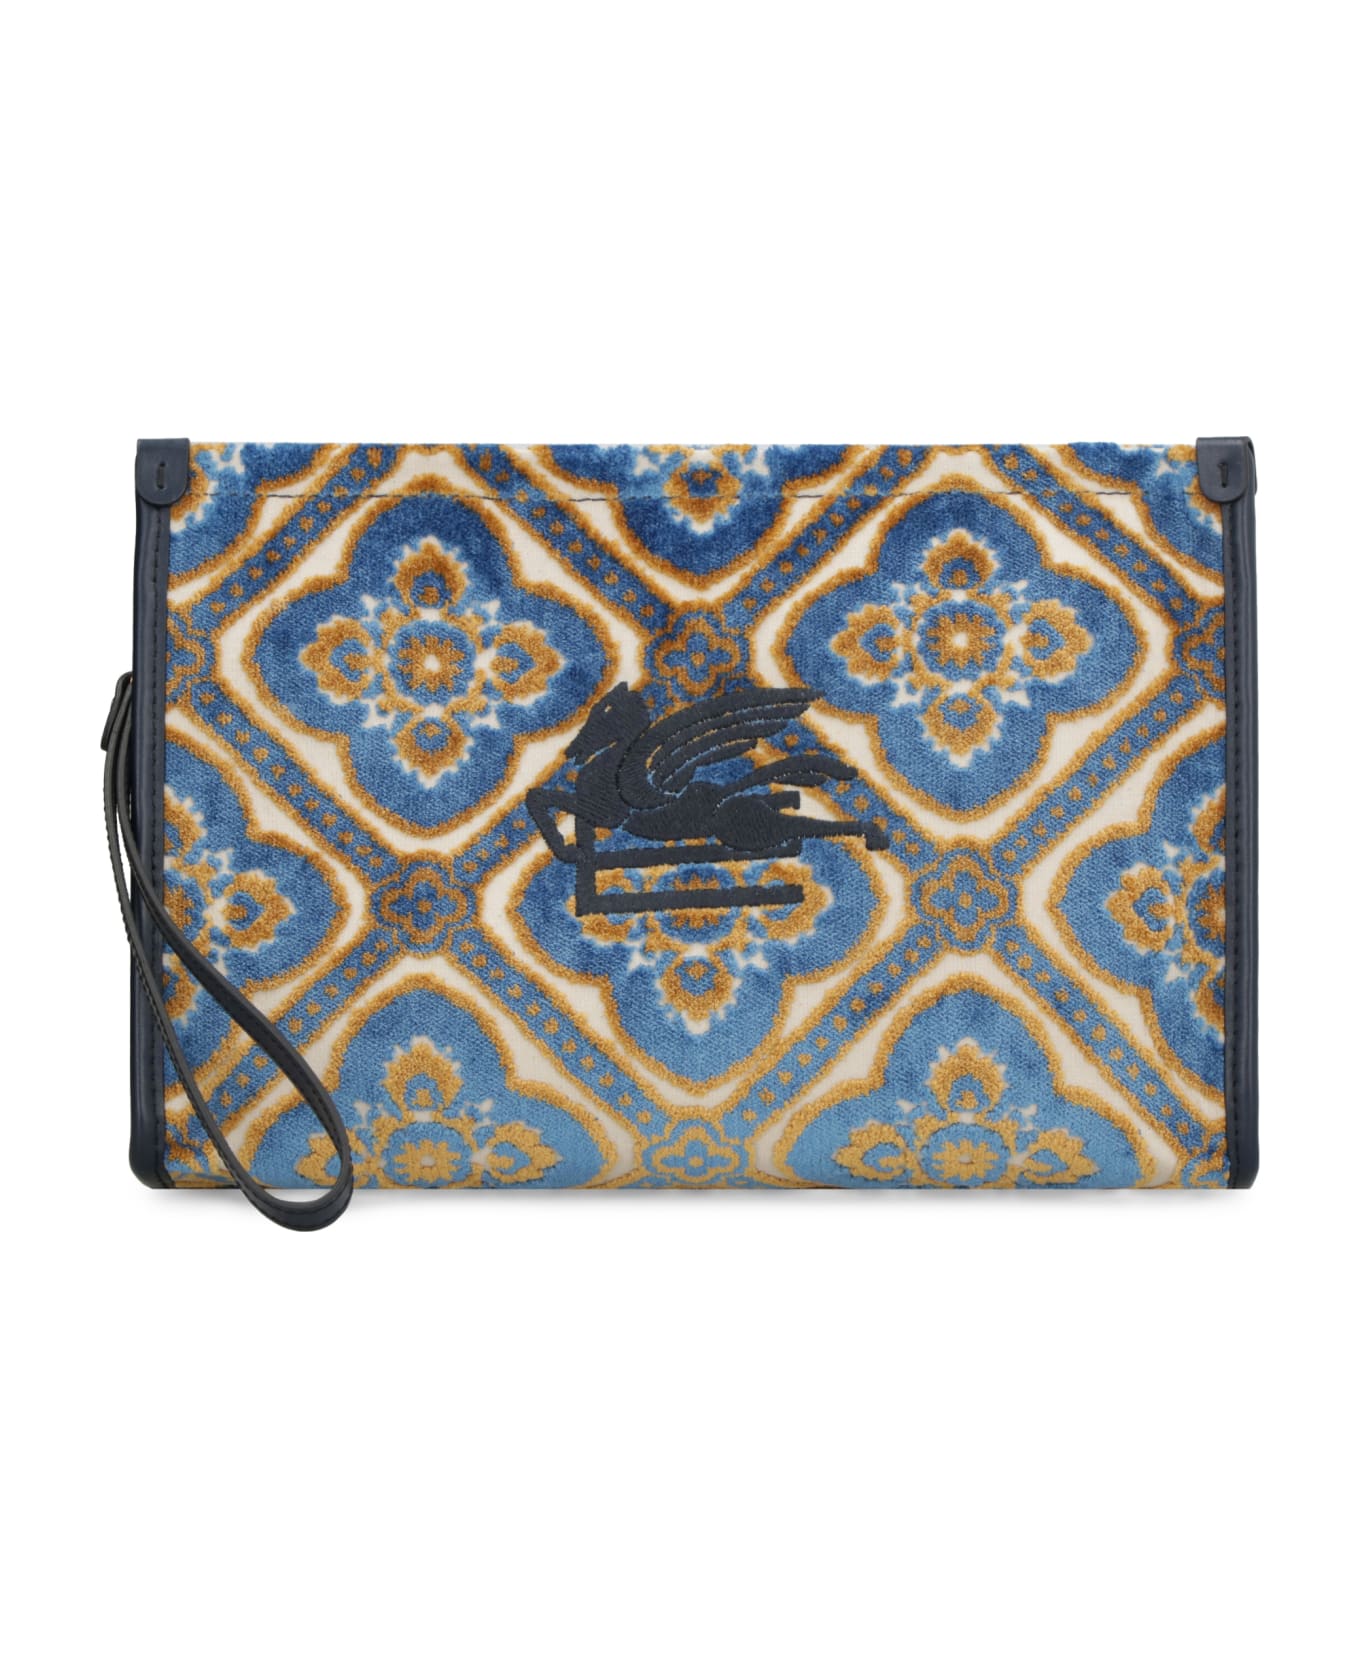 Etro Jacquard Fabric Clutch - blue クラッチバッグ